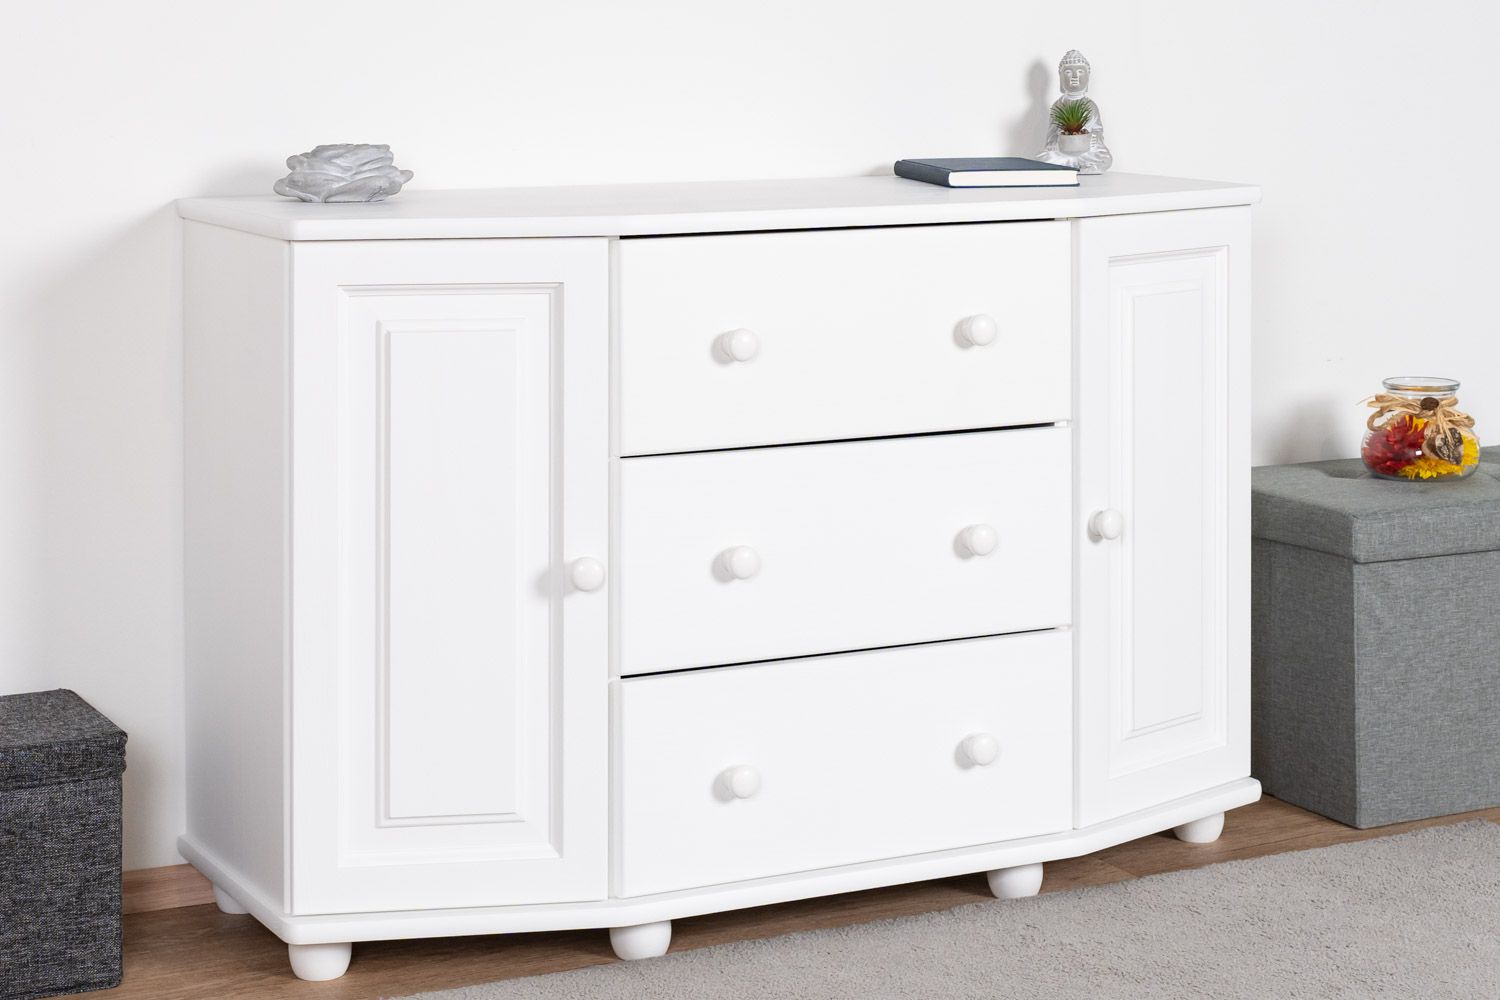 Classic chest of drawers in white Junco 170, solid pine, 78 x 120 x 47 cm, with 3 drawers and 4 compartments, high-quality workmanship, robust